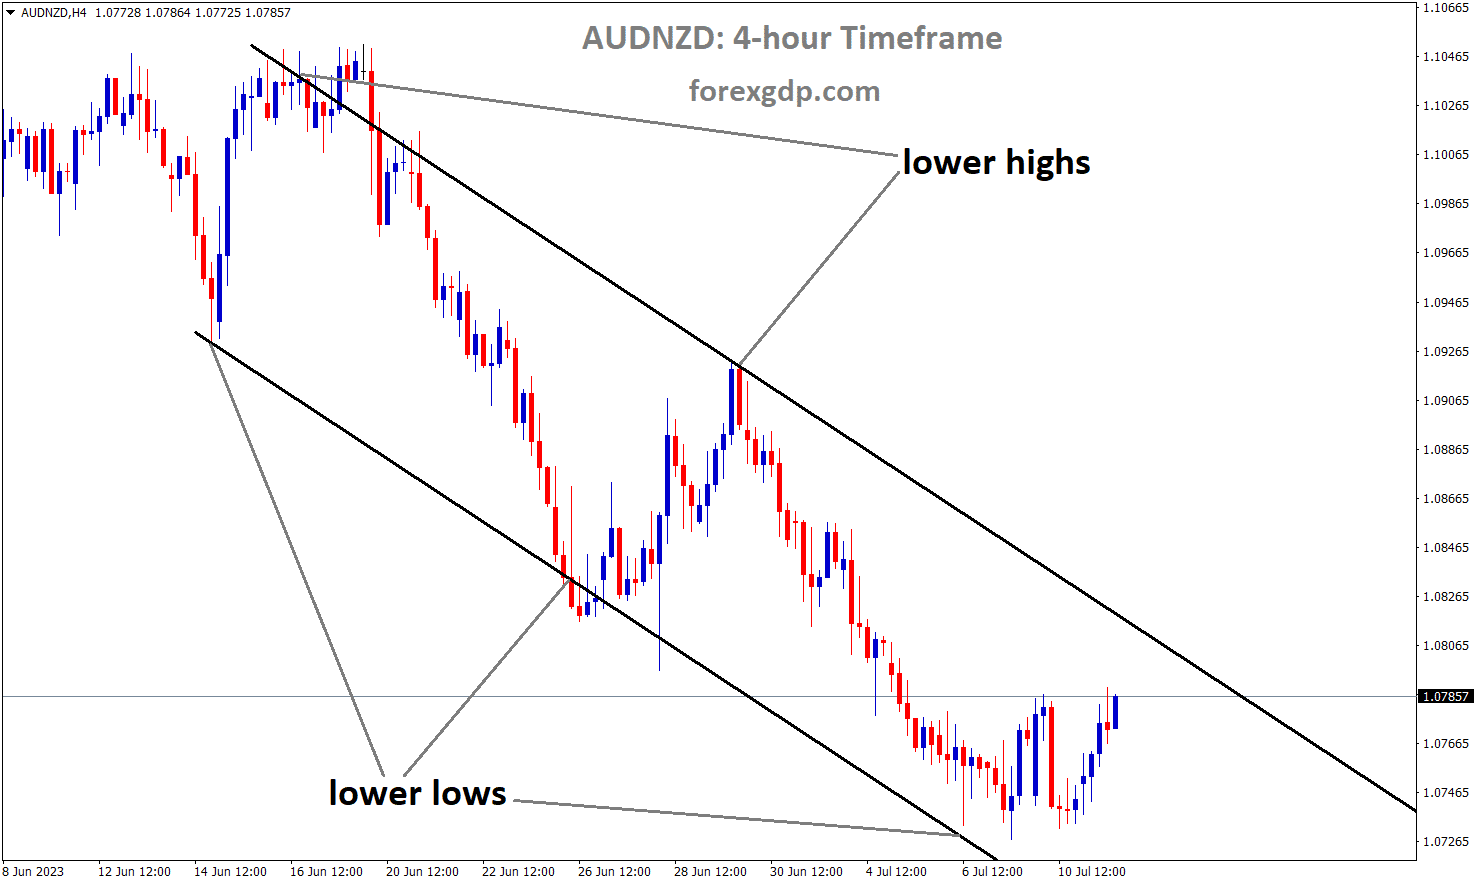 AUDNZD H4 TF analysis Market is moving in the Descending channel and the market has rebounded from the lower low area of the channel